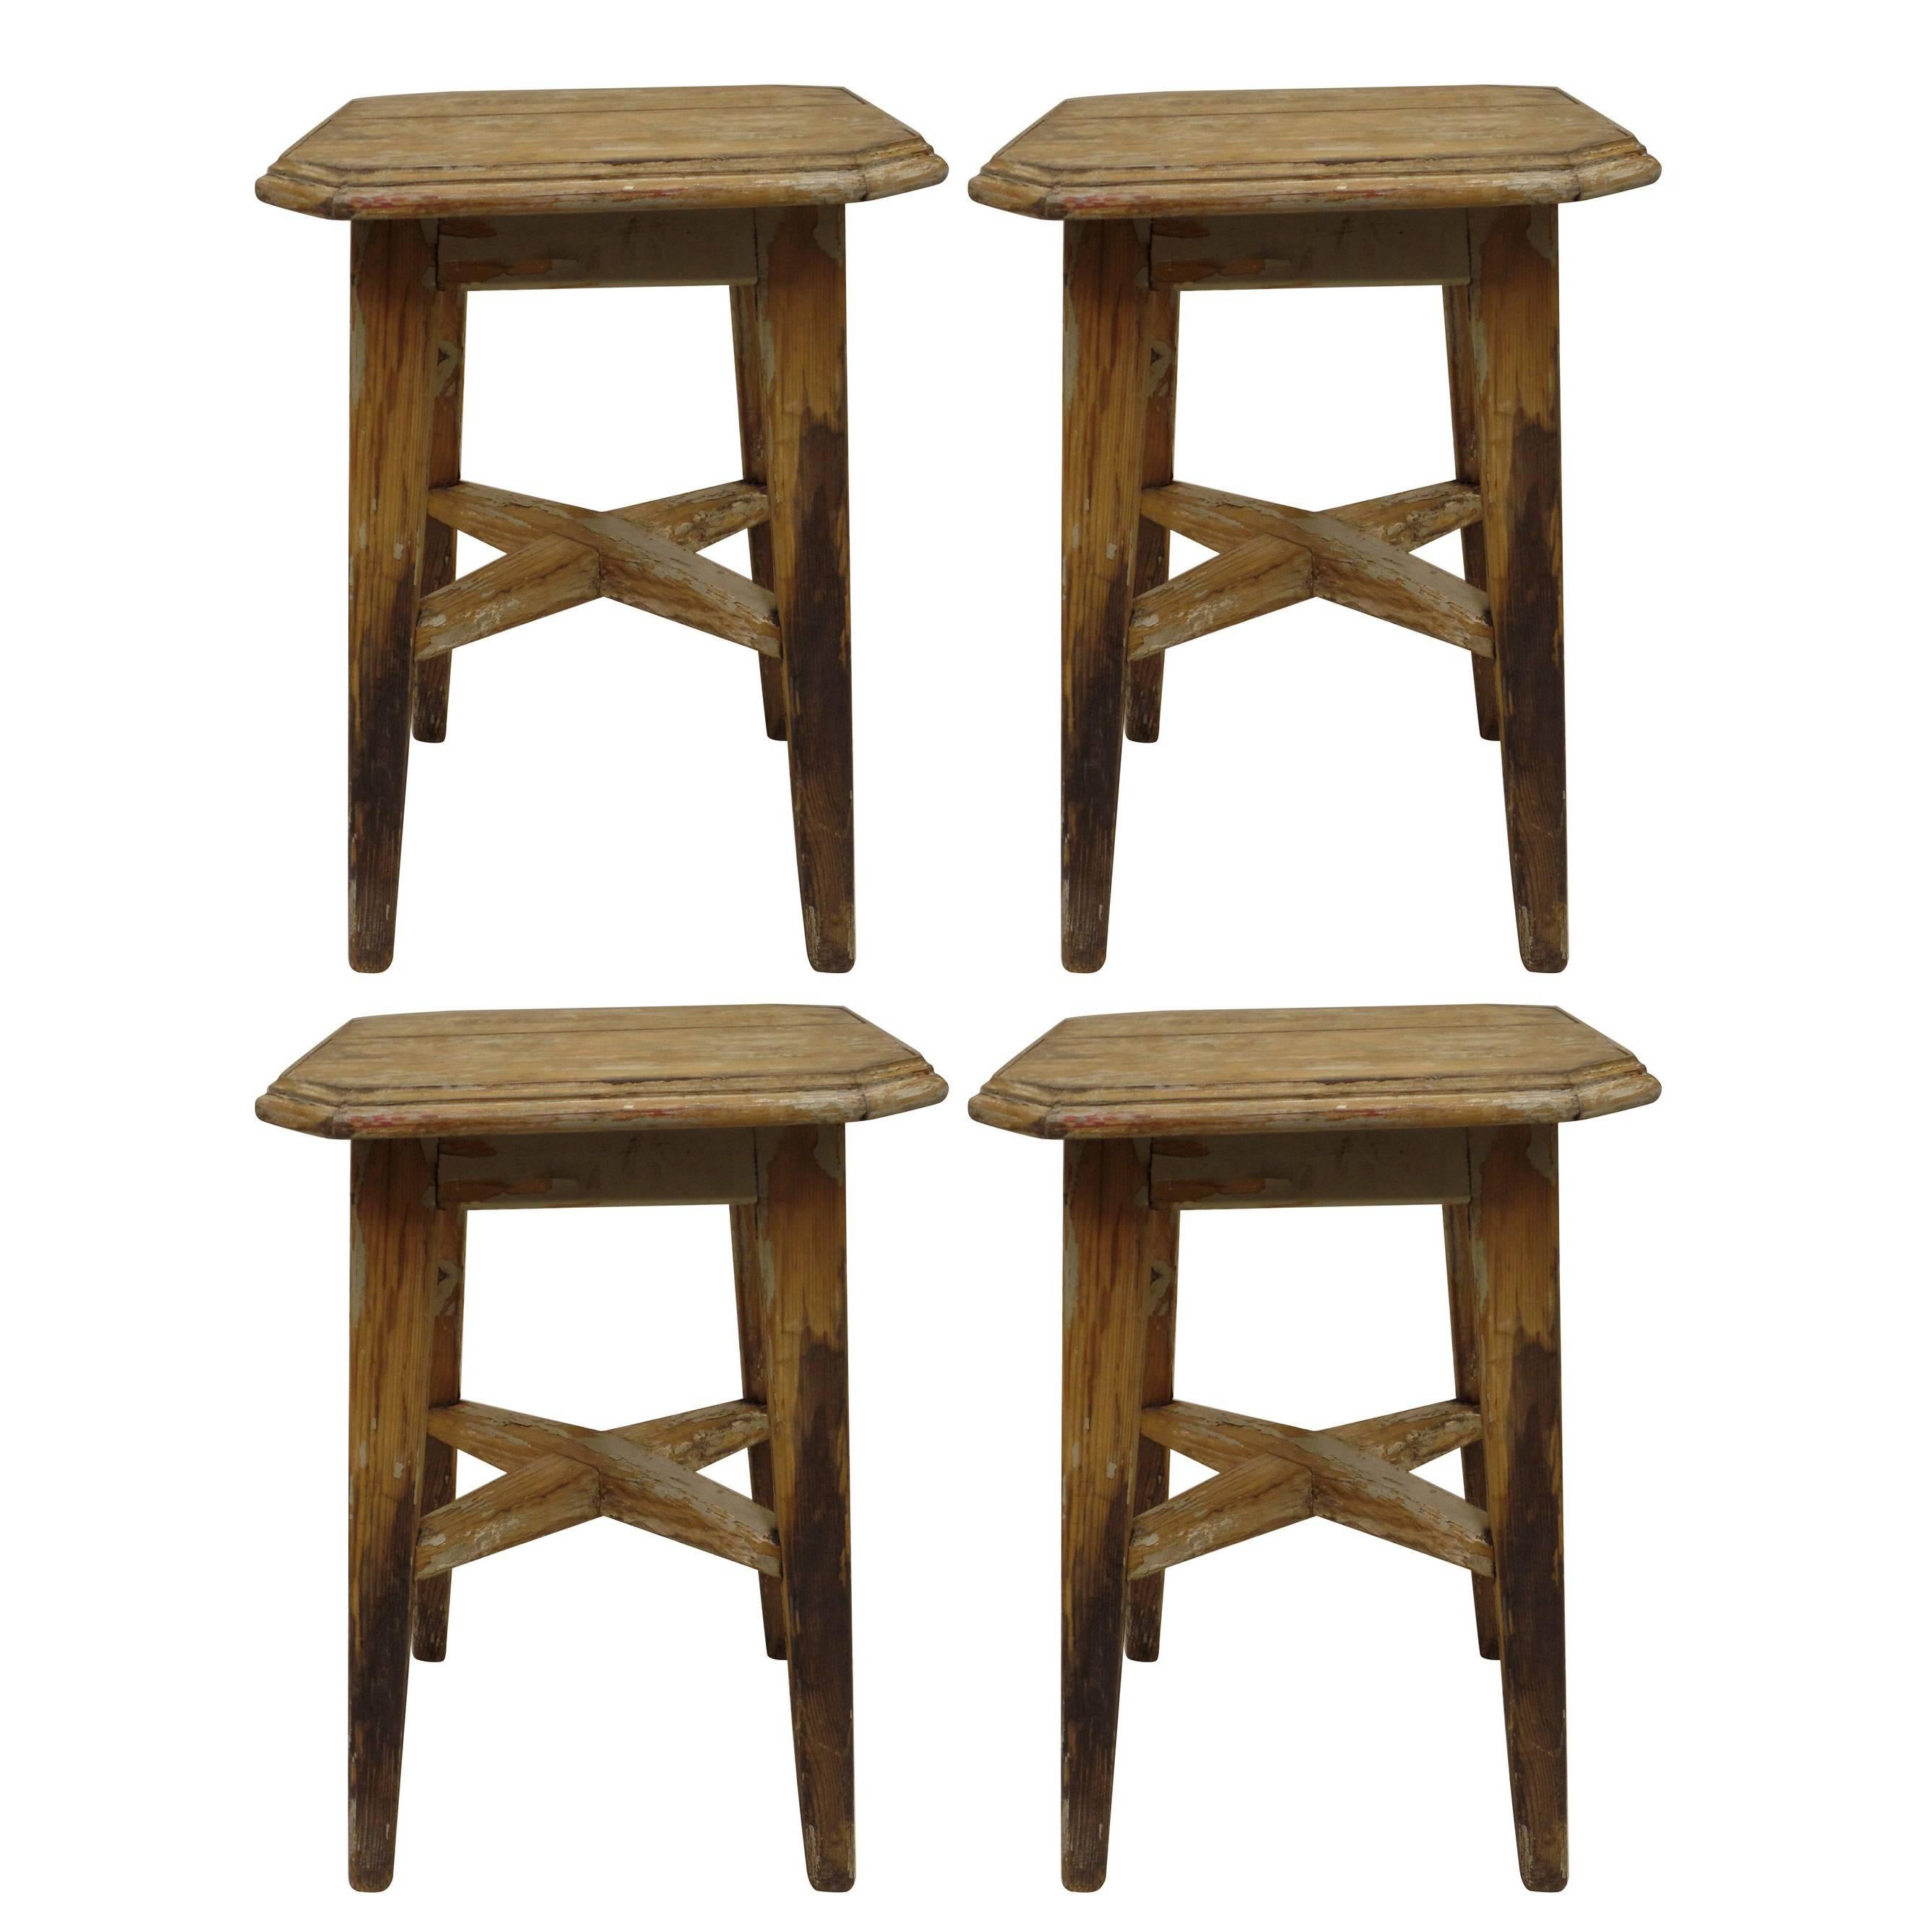 4 Italian 1940s Stools in the Modern Neoclassical Style